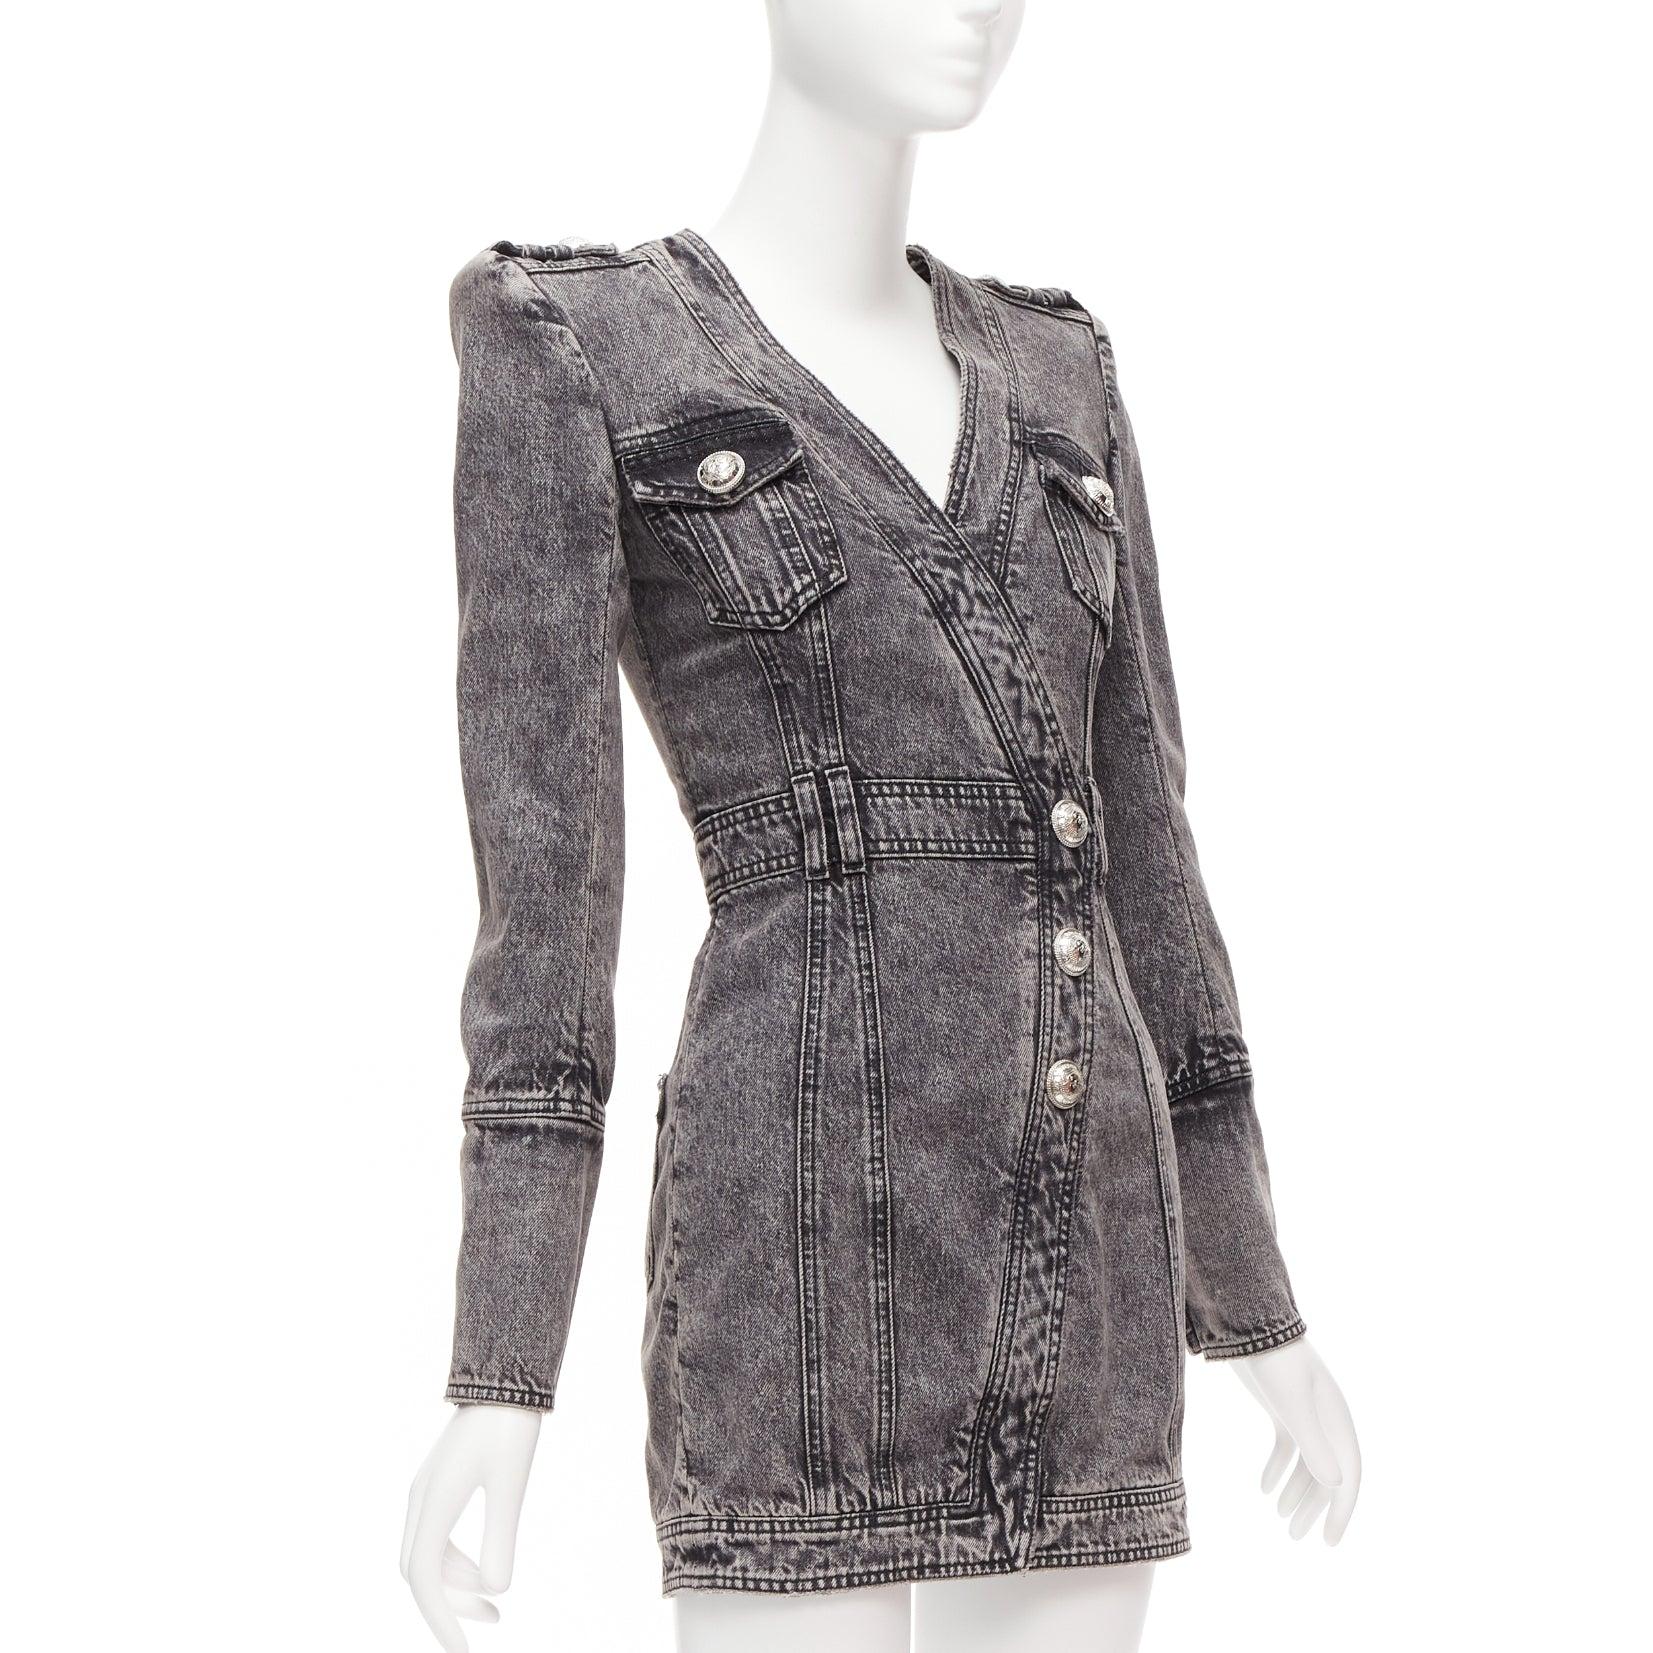 BALMAIN grey acid washed denim button embellished wrapped mini dress FR34 XS
Reference: AAWC/A00700
Brand: Balmain
Designer: Olivier Rousteing
Material: Cotton
Color: Grey
Pattern: Solid
Closure: Zip
Extra Details: Long sleeve denim short dress in